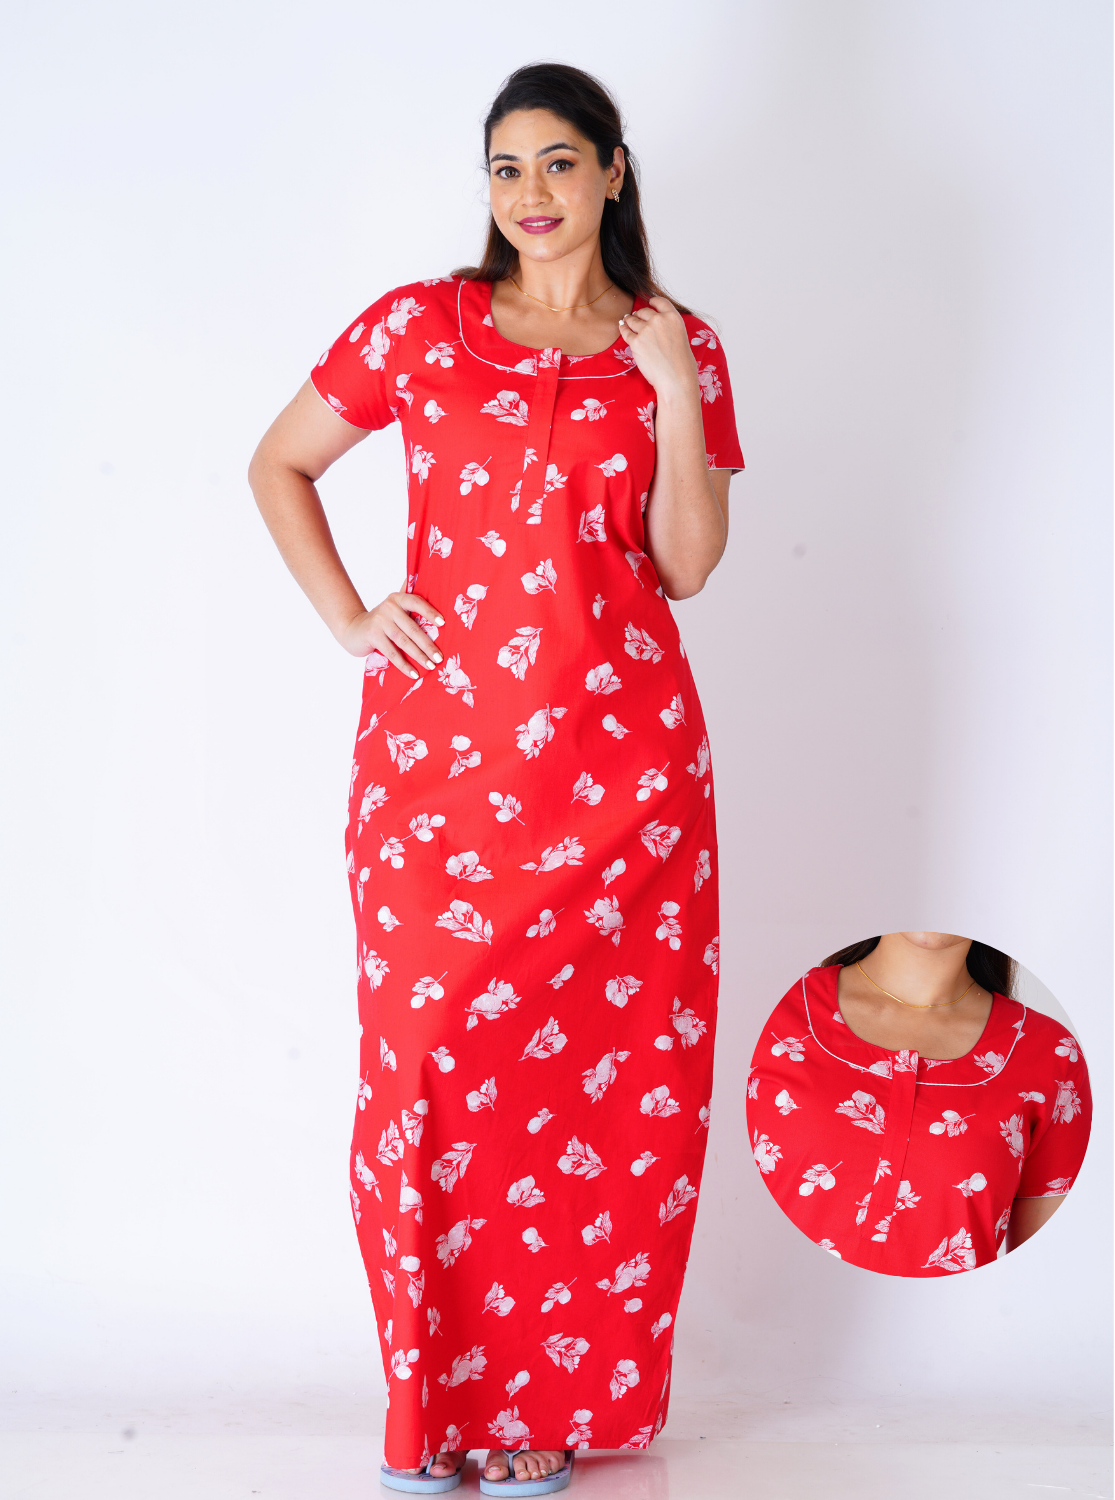 MANGAI New Collection Premium Cotton Printed Nighties- All Over Printed Stylish Nightwear for Stylish Women | Updated Design's